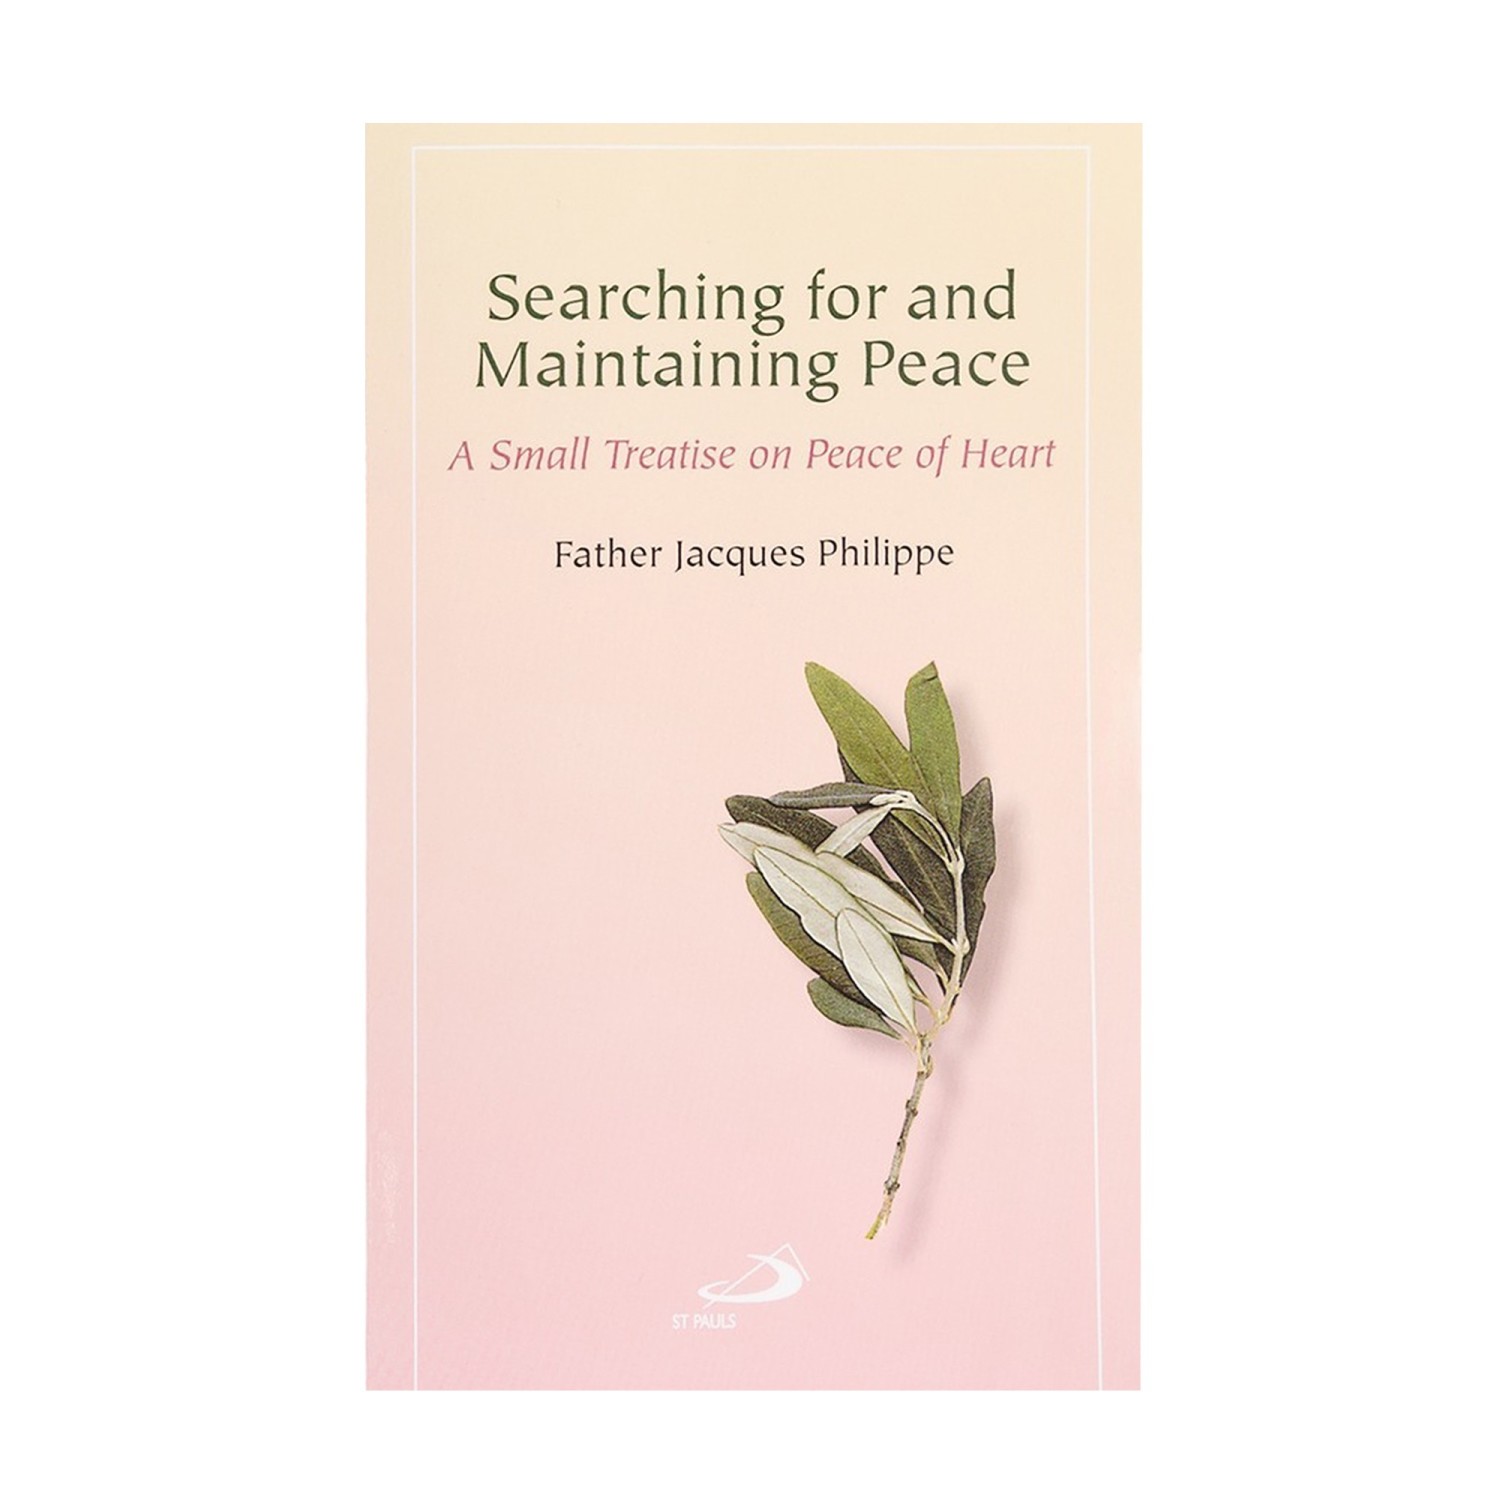 Cover image from the book, Searching For and Maintaining Peace: A Small Treatise on Peace of Heart